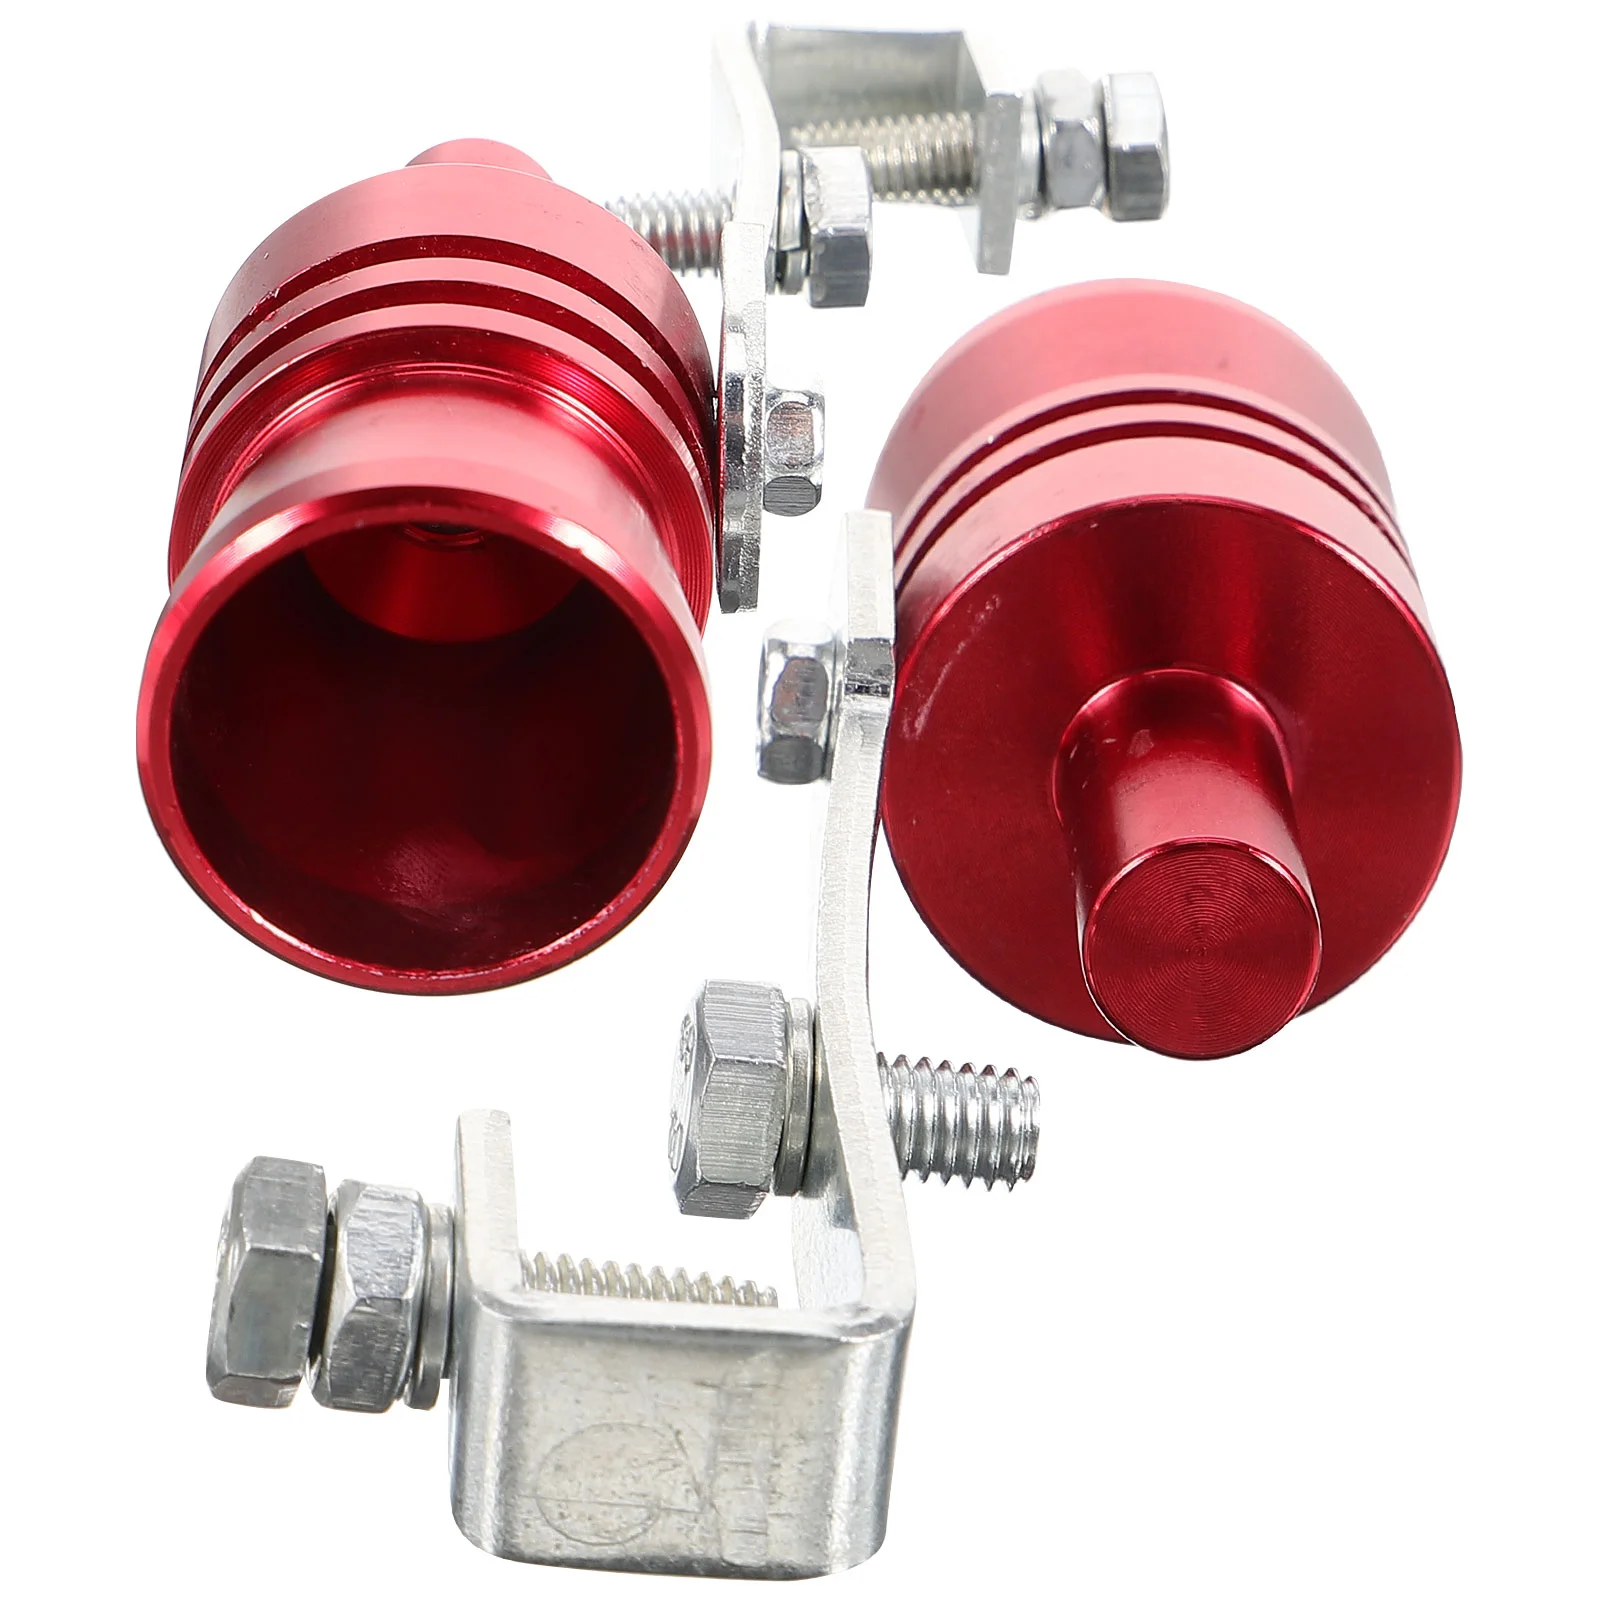 

2pcs Exhaust Pipe Sounders Car Turning Turbines Whistle Sounders Tail for Automobile Repacking